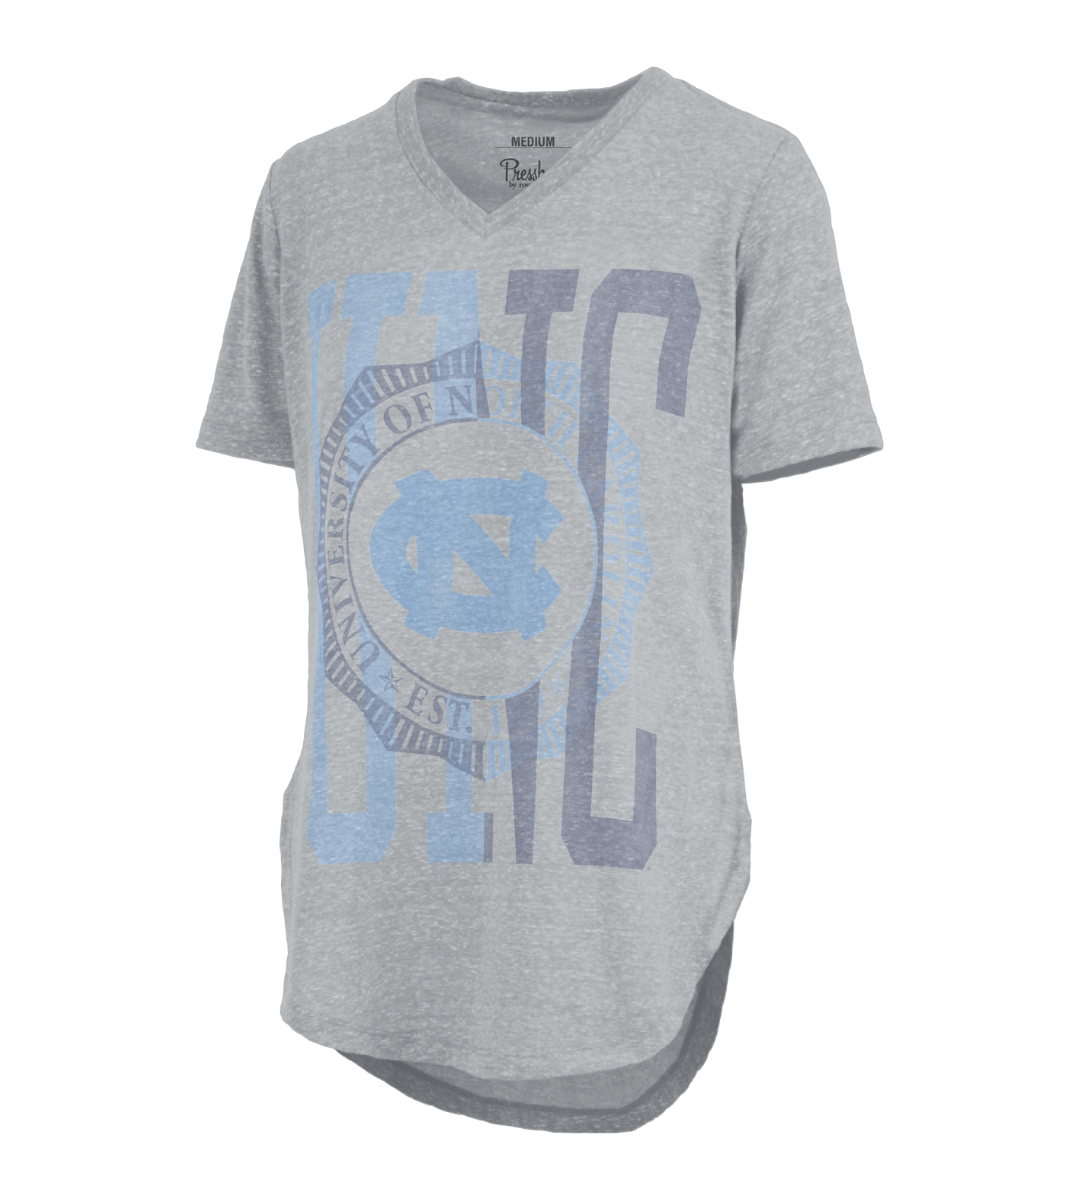 UNC Chapel Hill Women's V-Neck Top with Seal in Grey